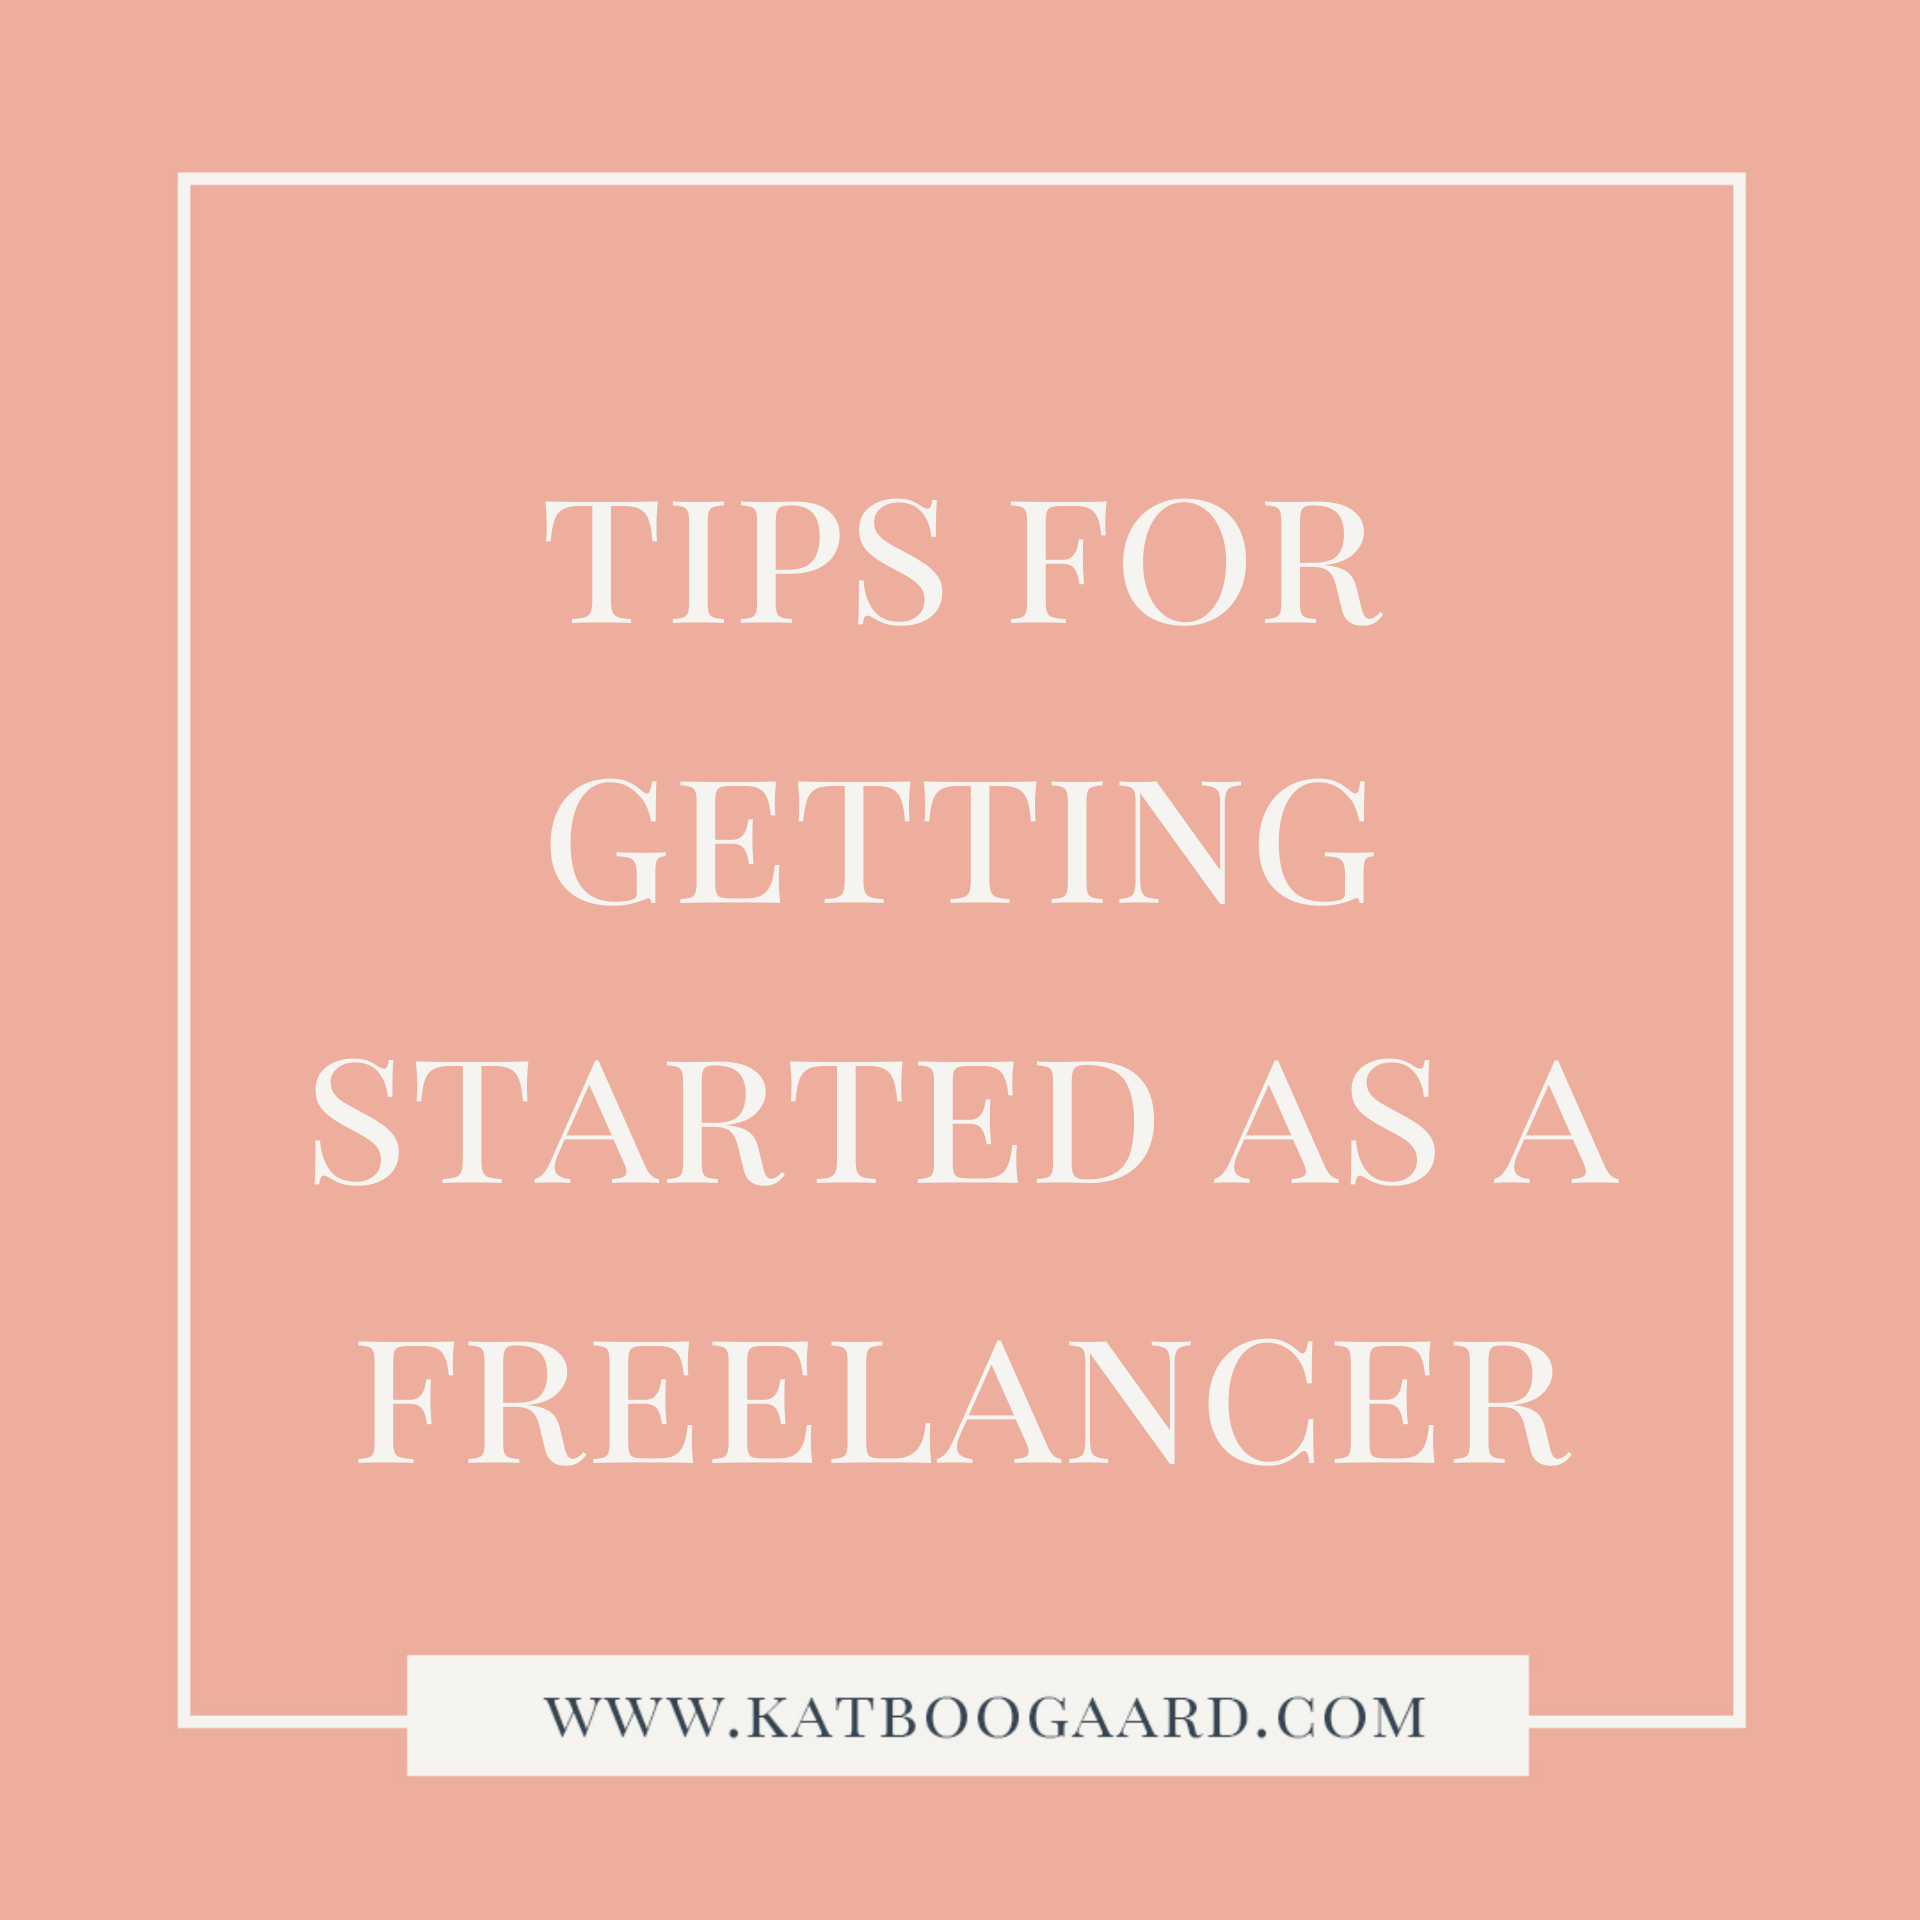 Getting started as a freelancer